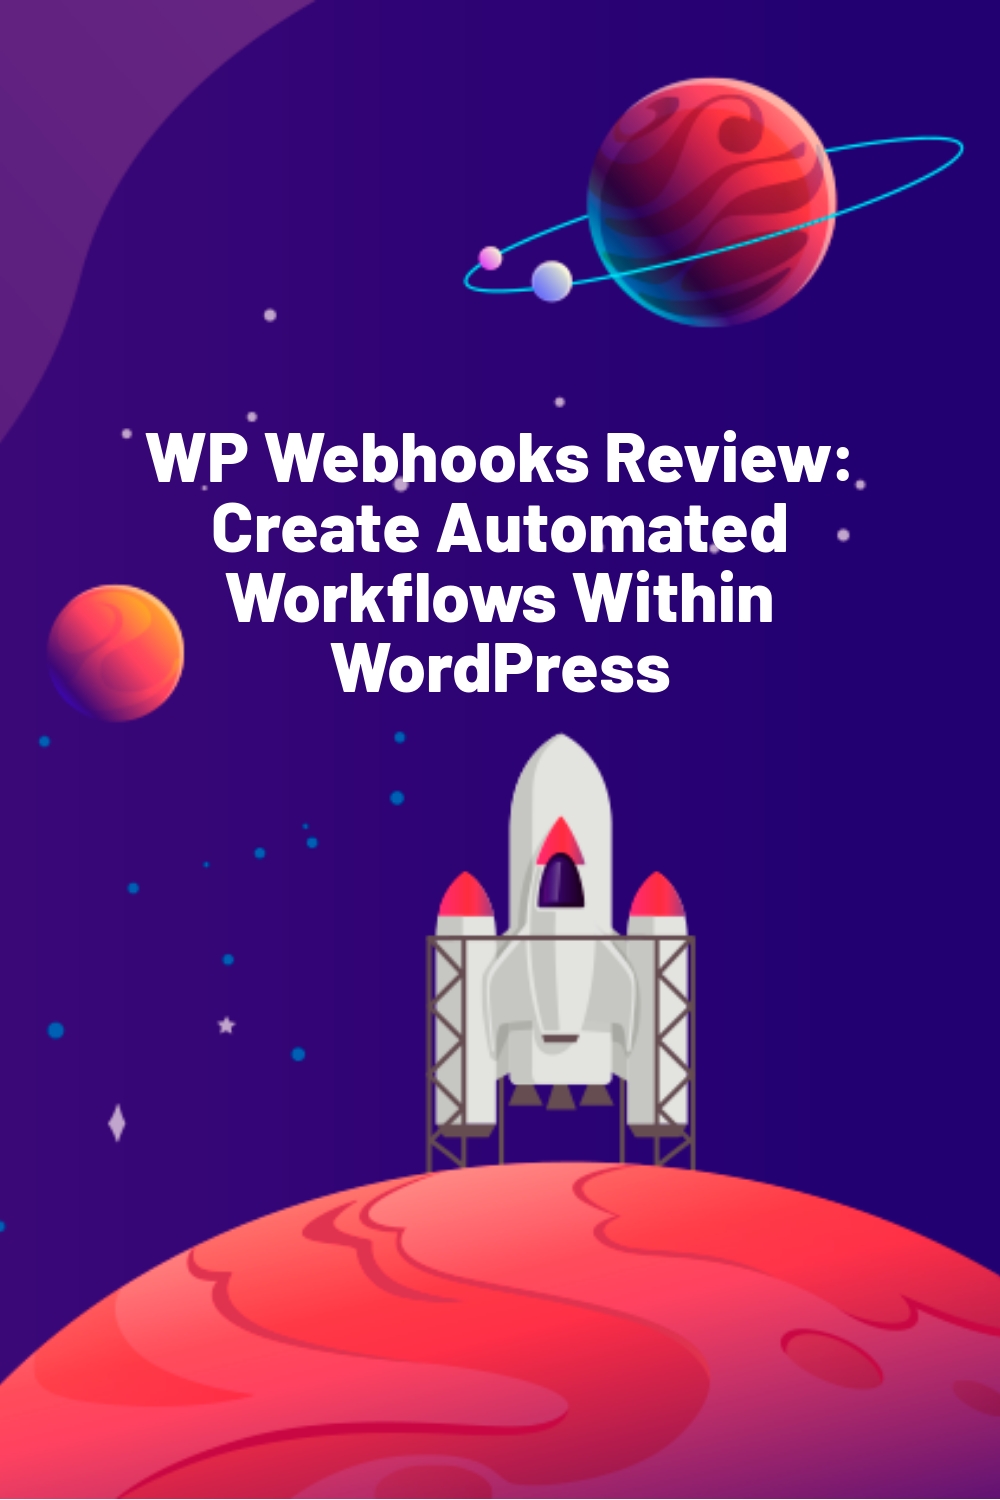 WP Webhooks Review: Create Automated Workflows Within WordPress